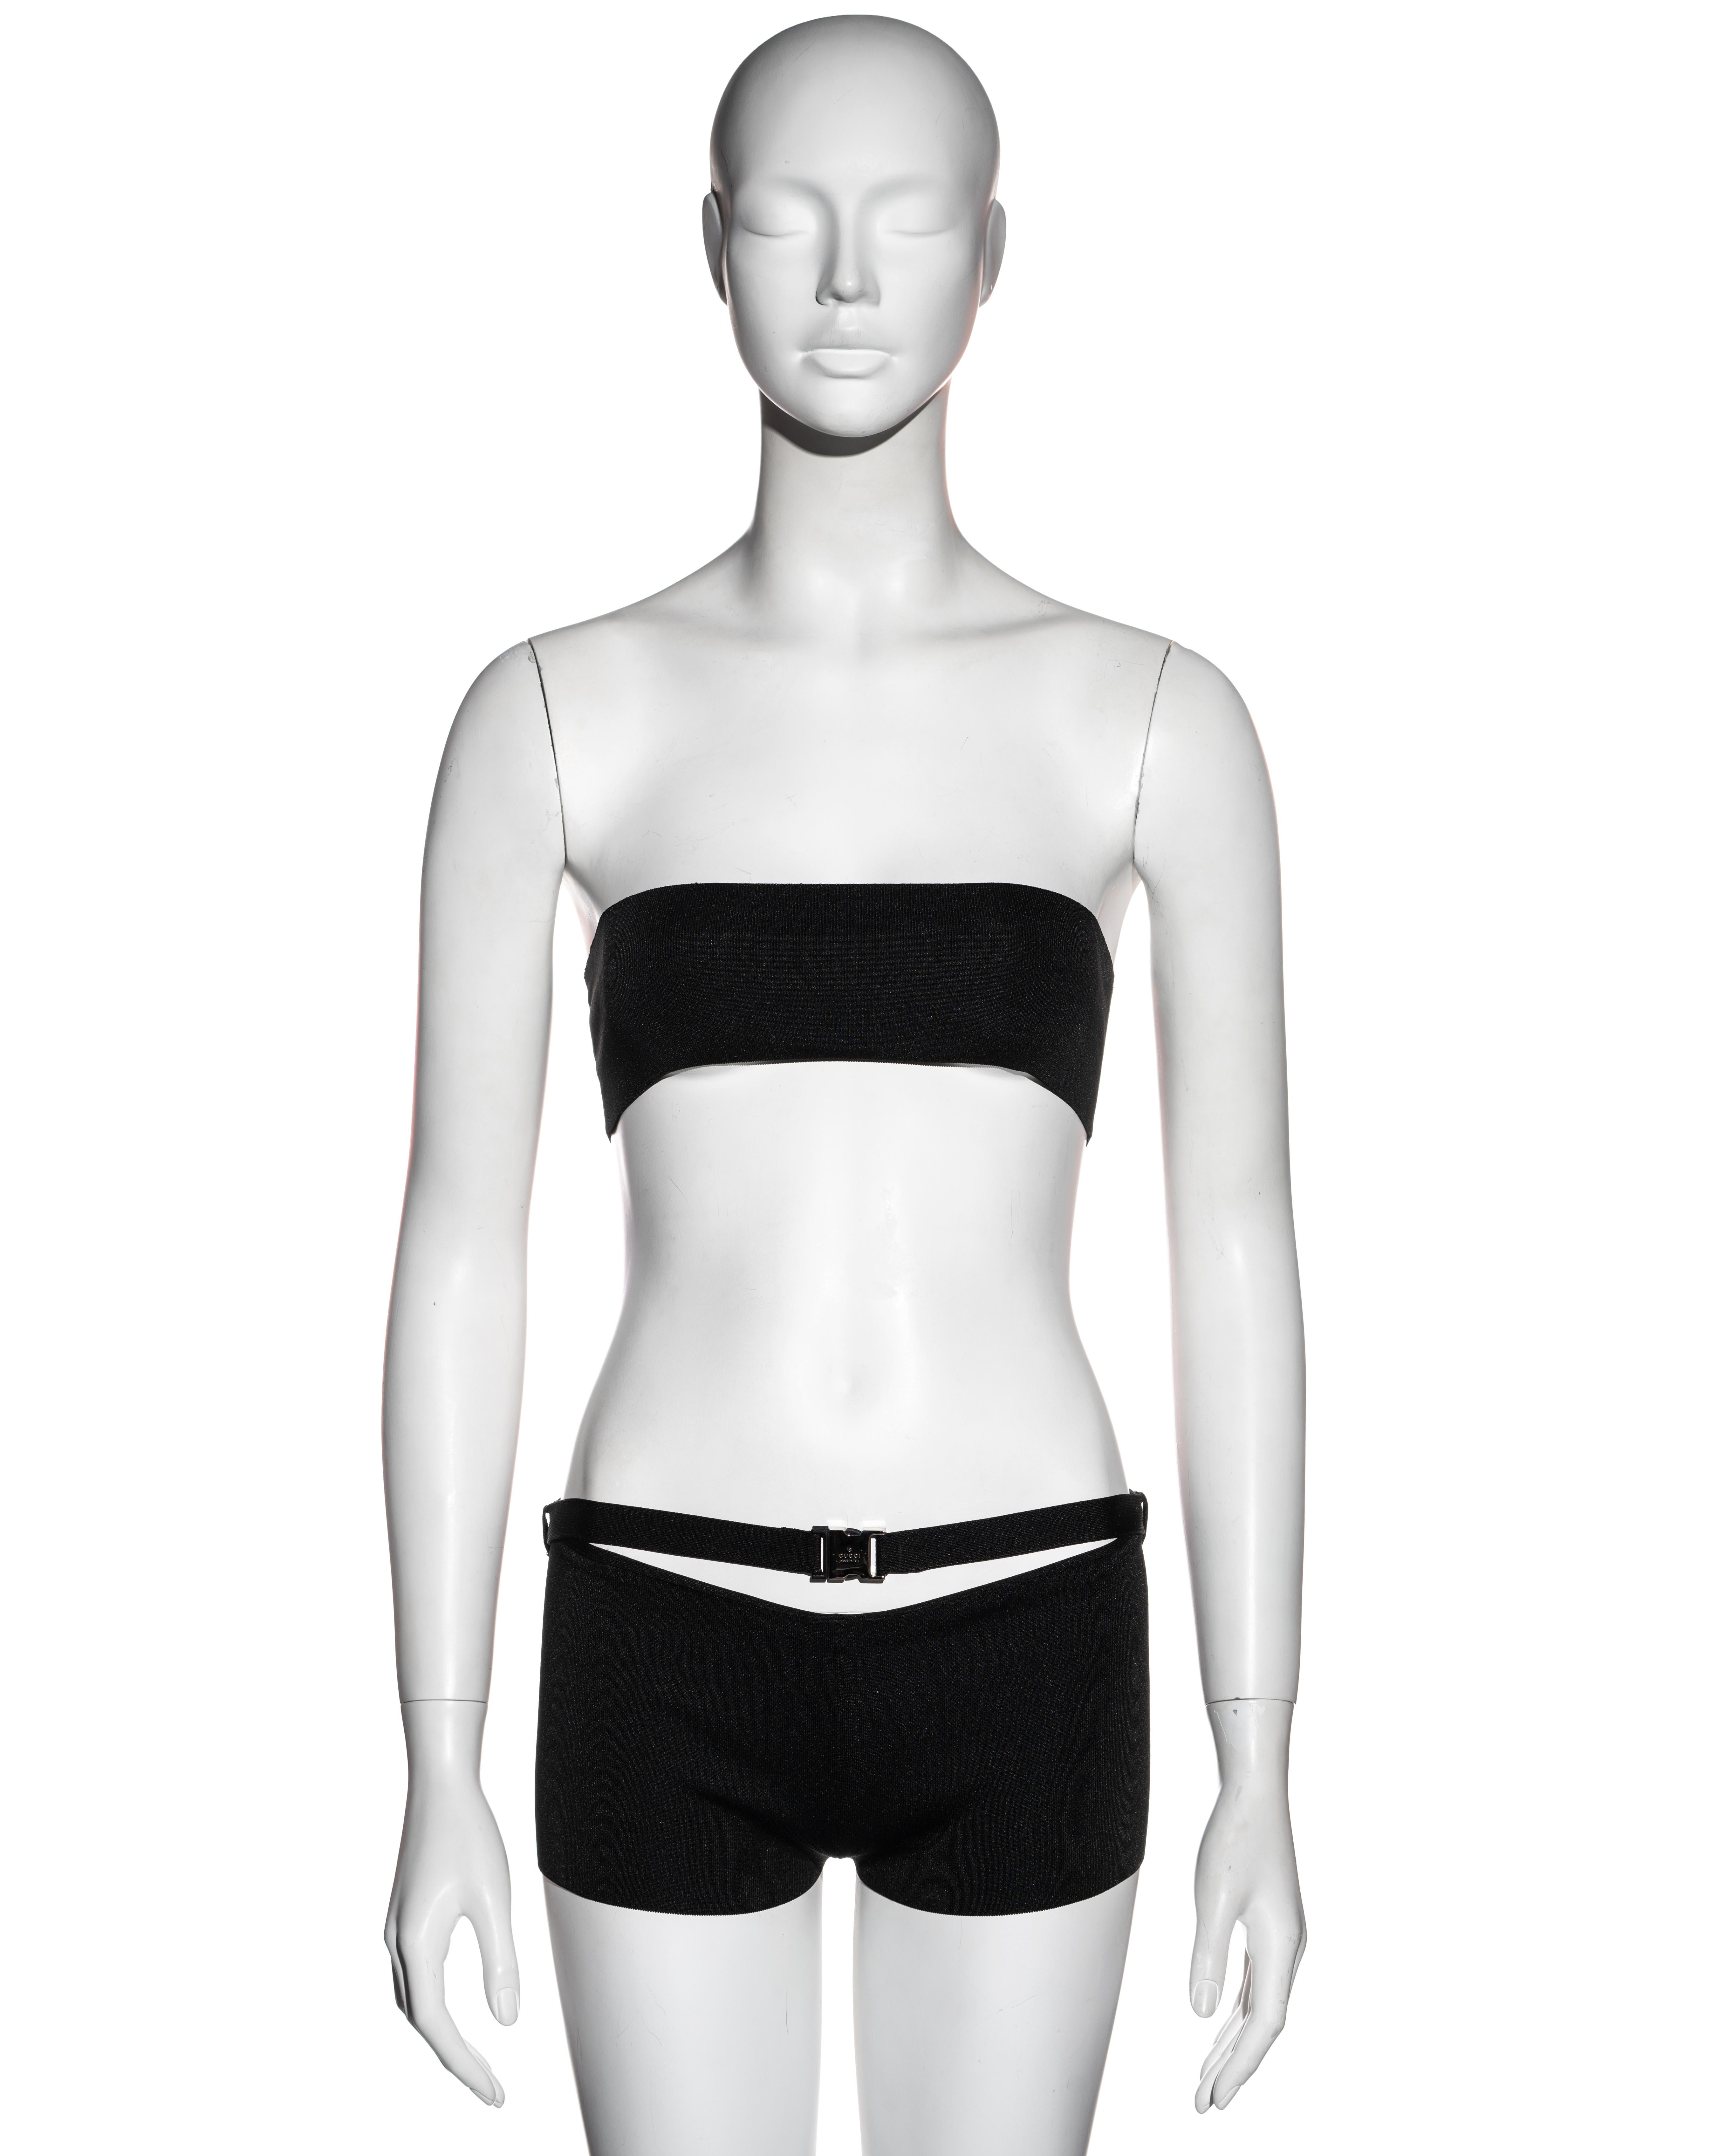 ▪ Gucci black 2 piece resort set 
▪ Bandeau tube top 
▪ Hot pants / mini shorts 
▪ Silver metal clip buckle with 'Gucci' engraving 
▪ Size Small 
▪ Resort 2010